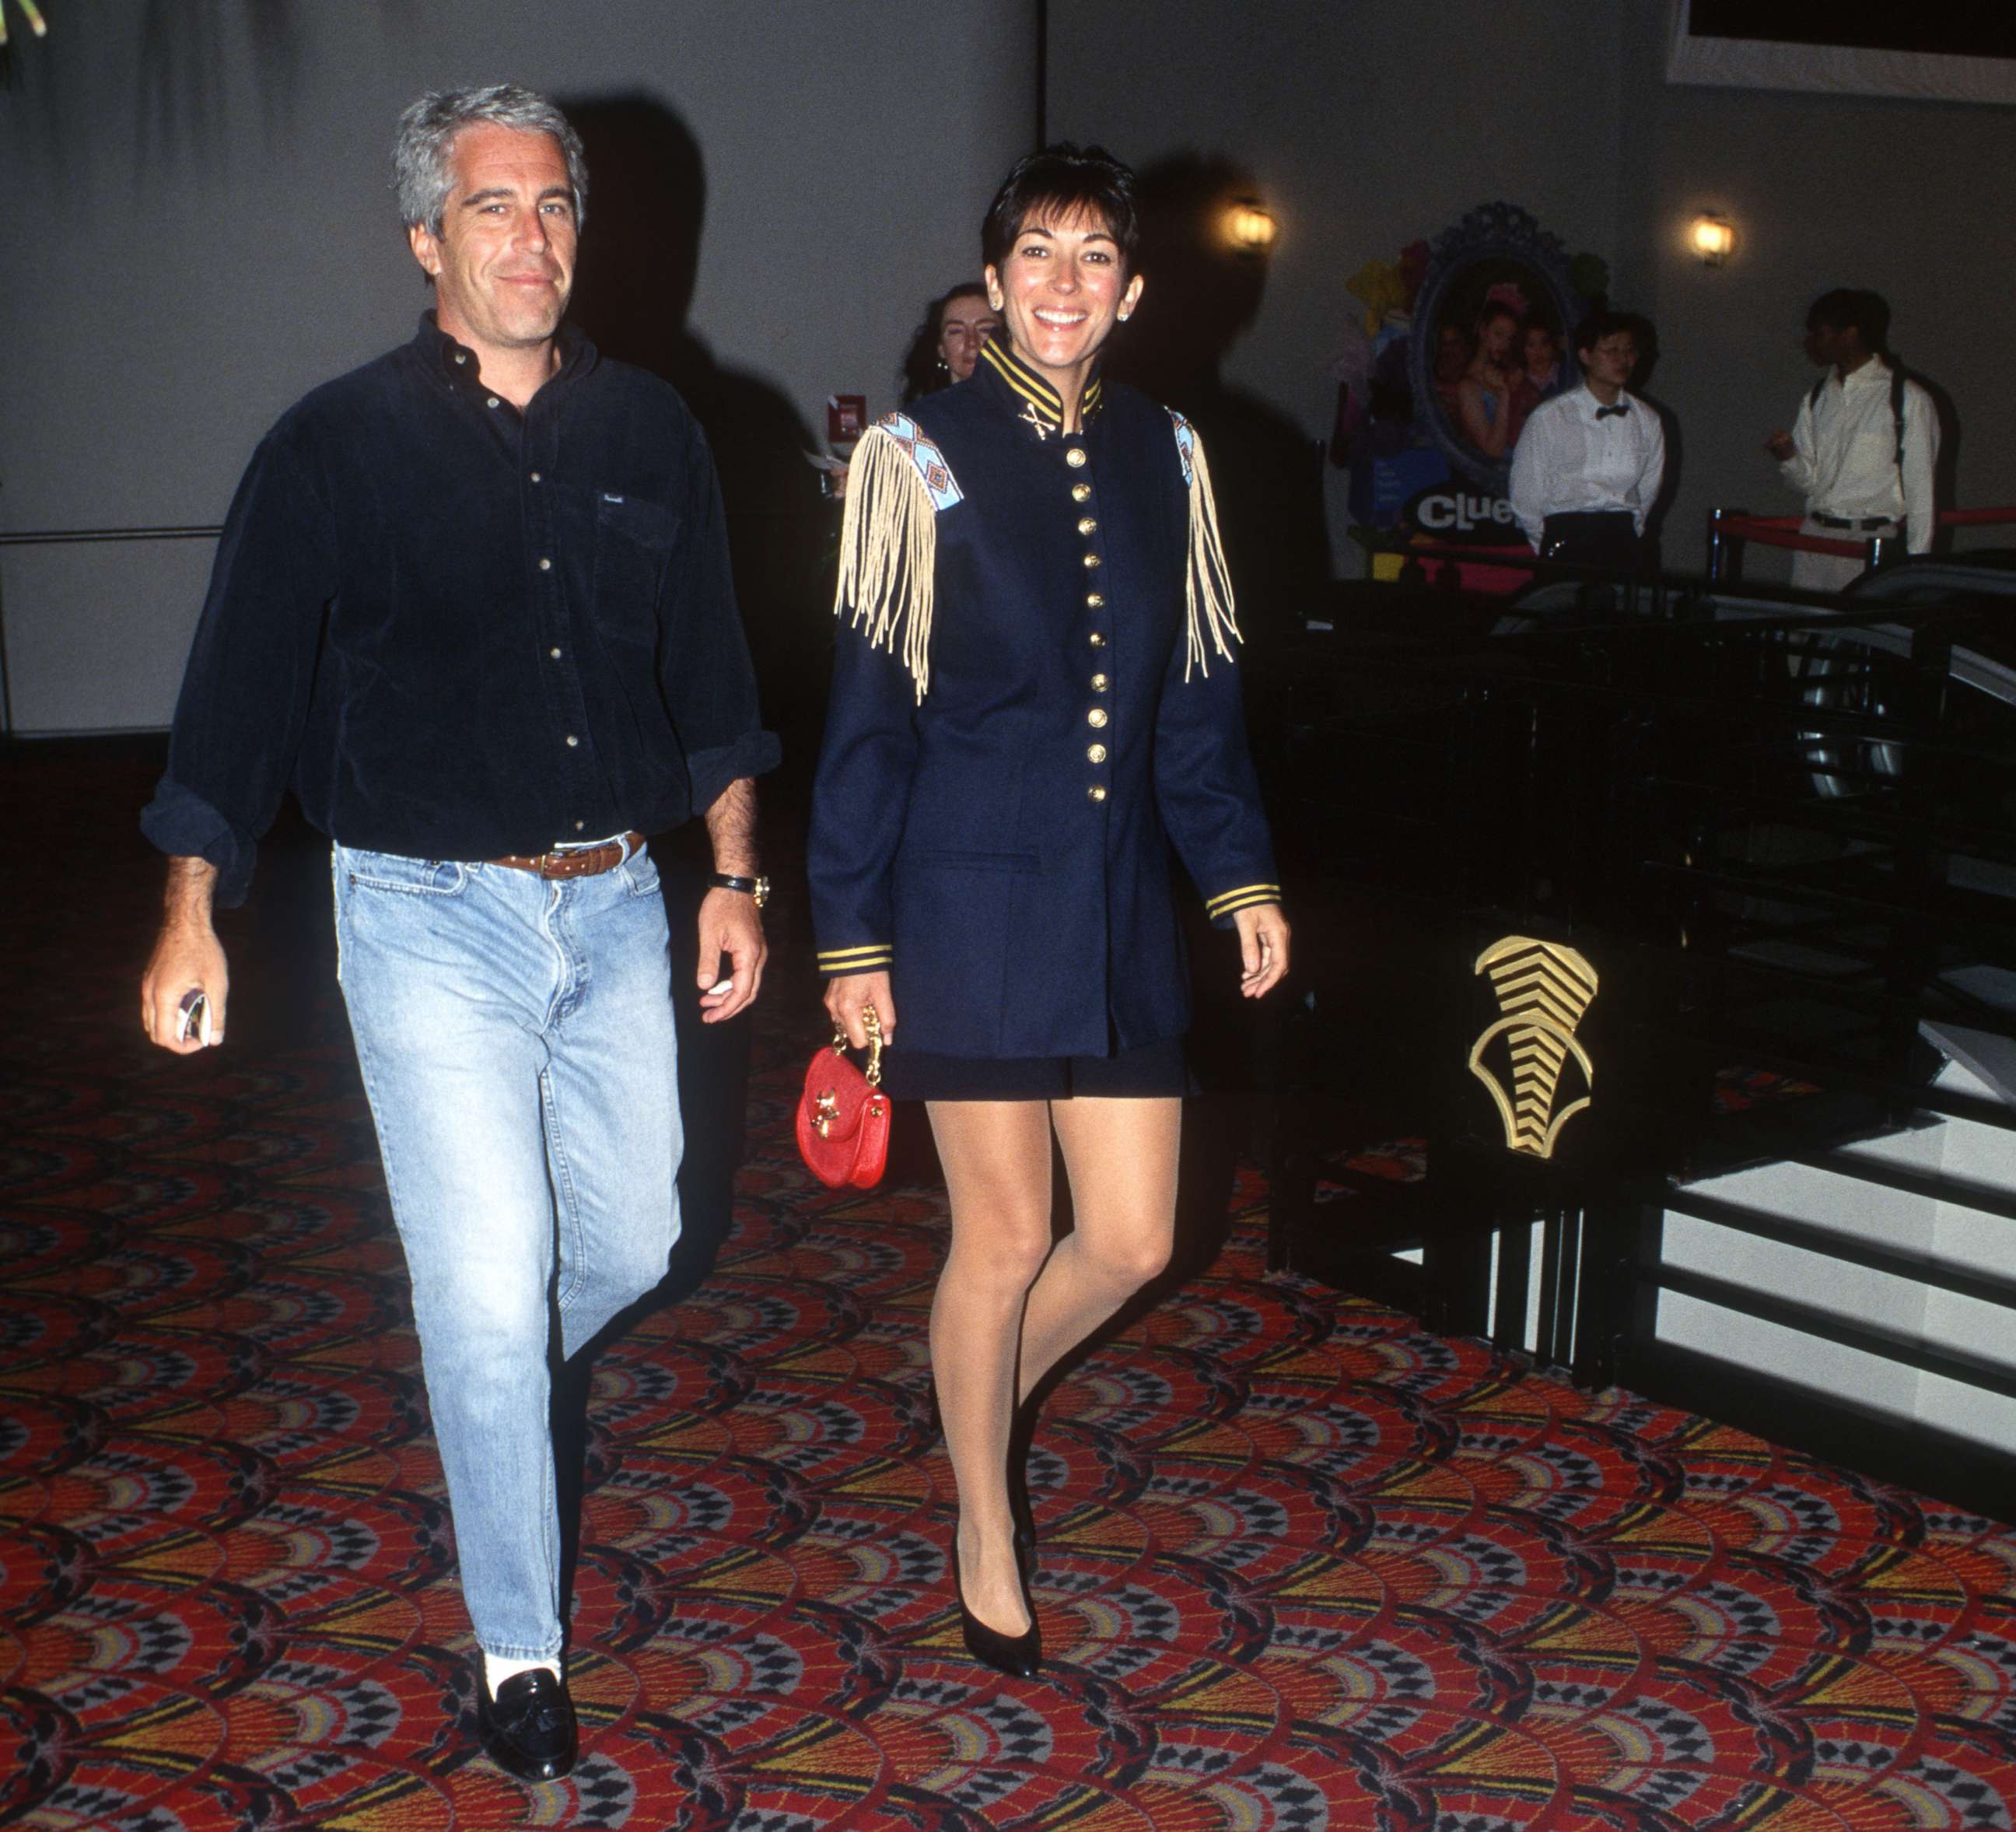 PHOTO: Jeffrey Epstein and Ghislaine Maxwell attend an event in New York City, June 13, 1995.